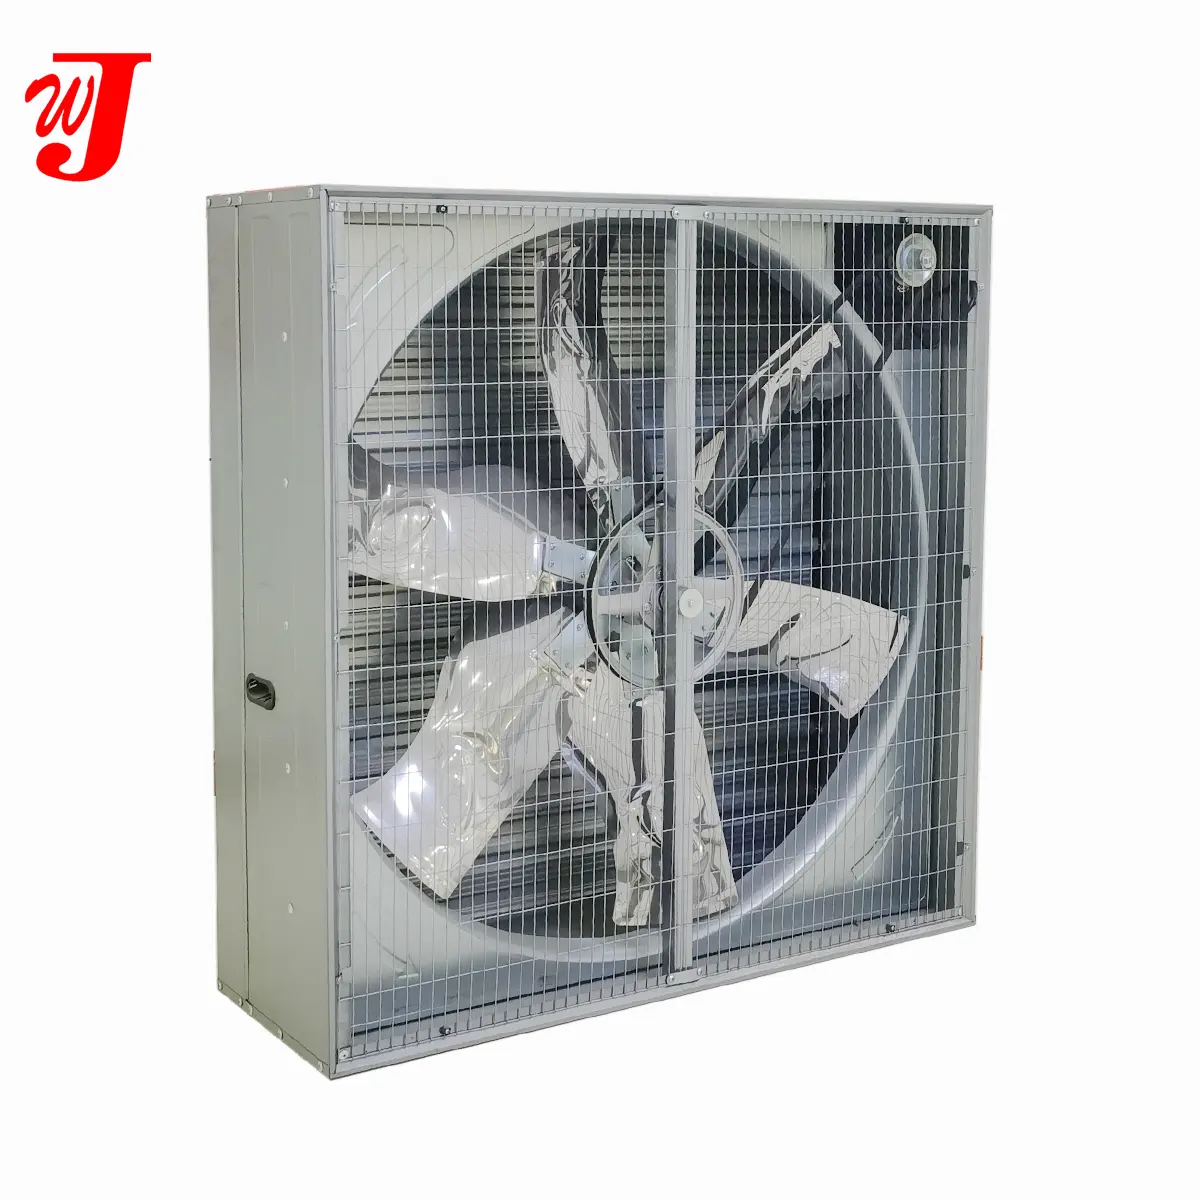 Push-pull Rod Opening Device And Shutters Open Automatically Farm Ventilation Cooling Exhaust Fan